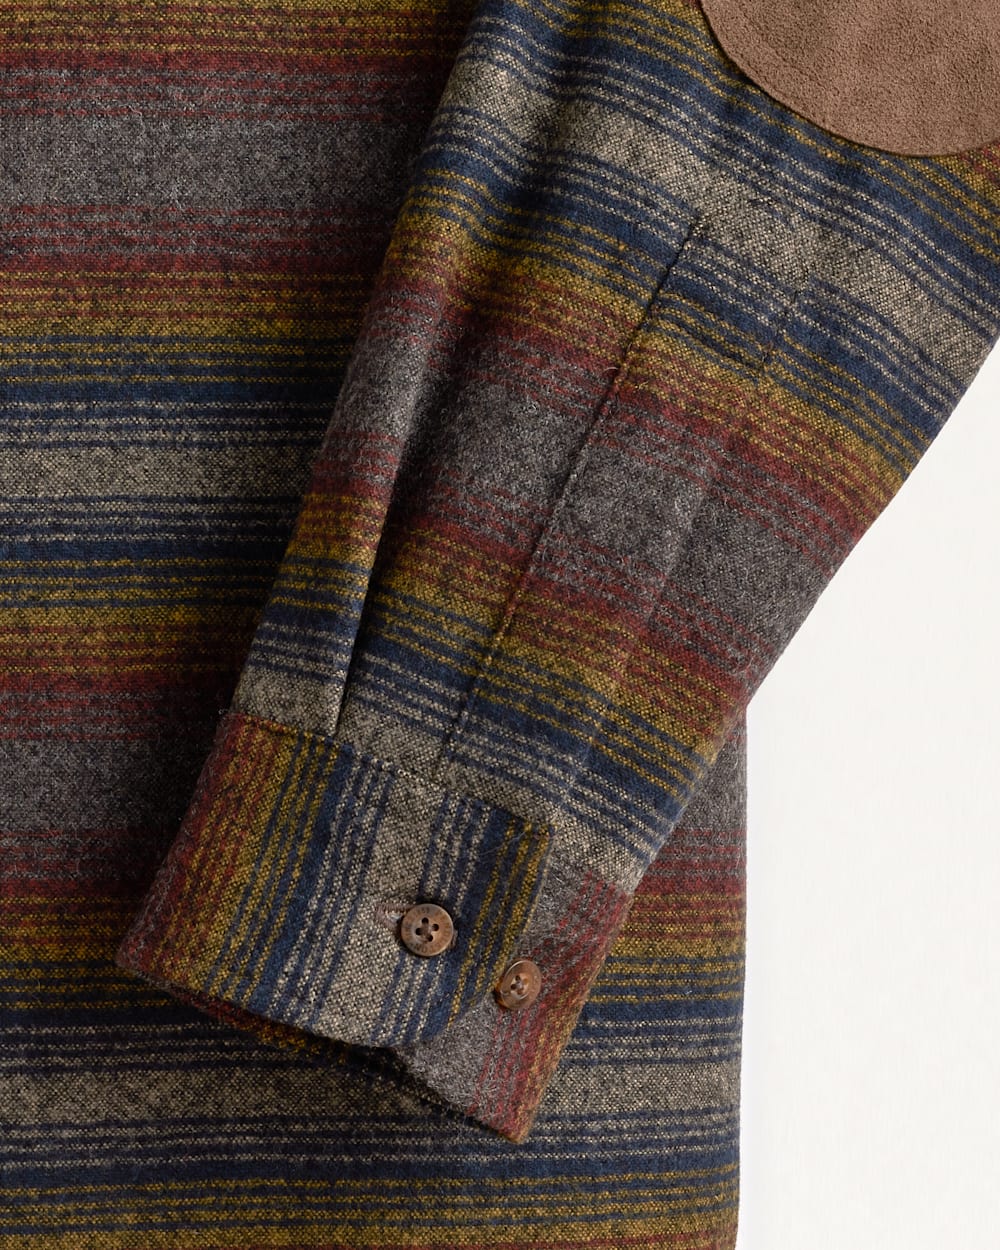 ALTERNATE VIEW OF MEN'S STRIPE ELBOW-PATCH TRAIL SHIRT IN BROWN MULTI OMBRE STRIPE image number 2